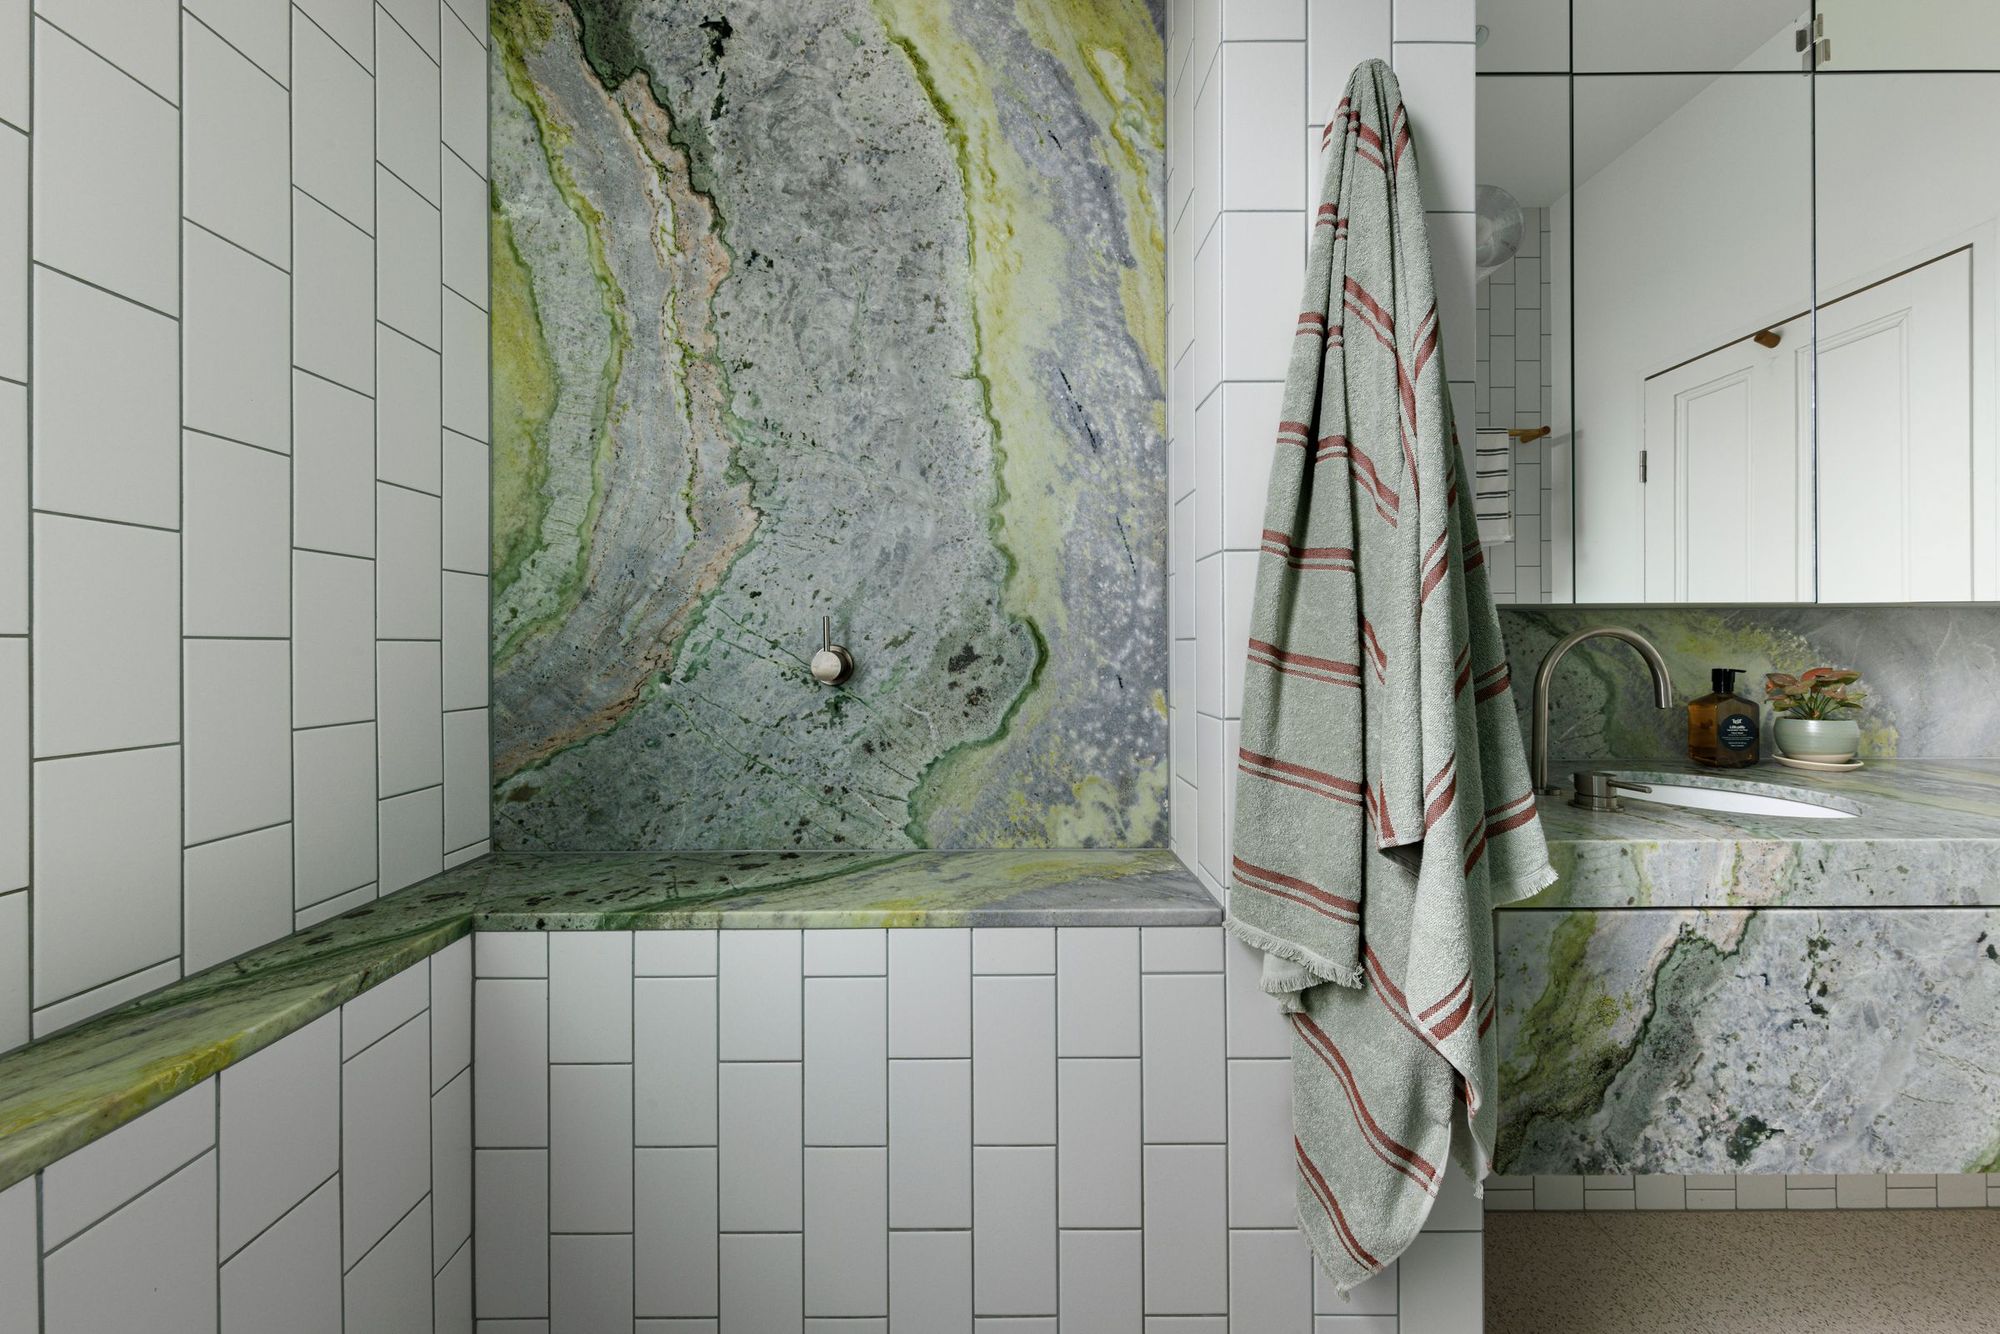 Tiara House by FMD Architects. Bathroom, featuring chartreuse and green veined stone finishes 